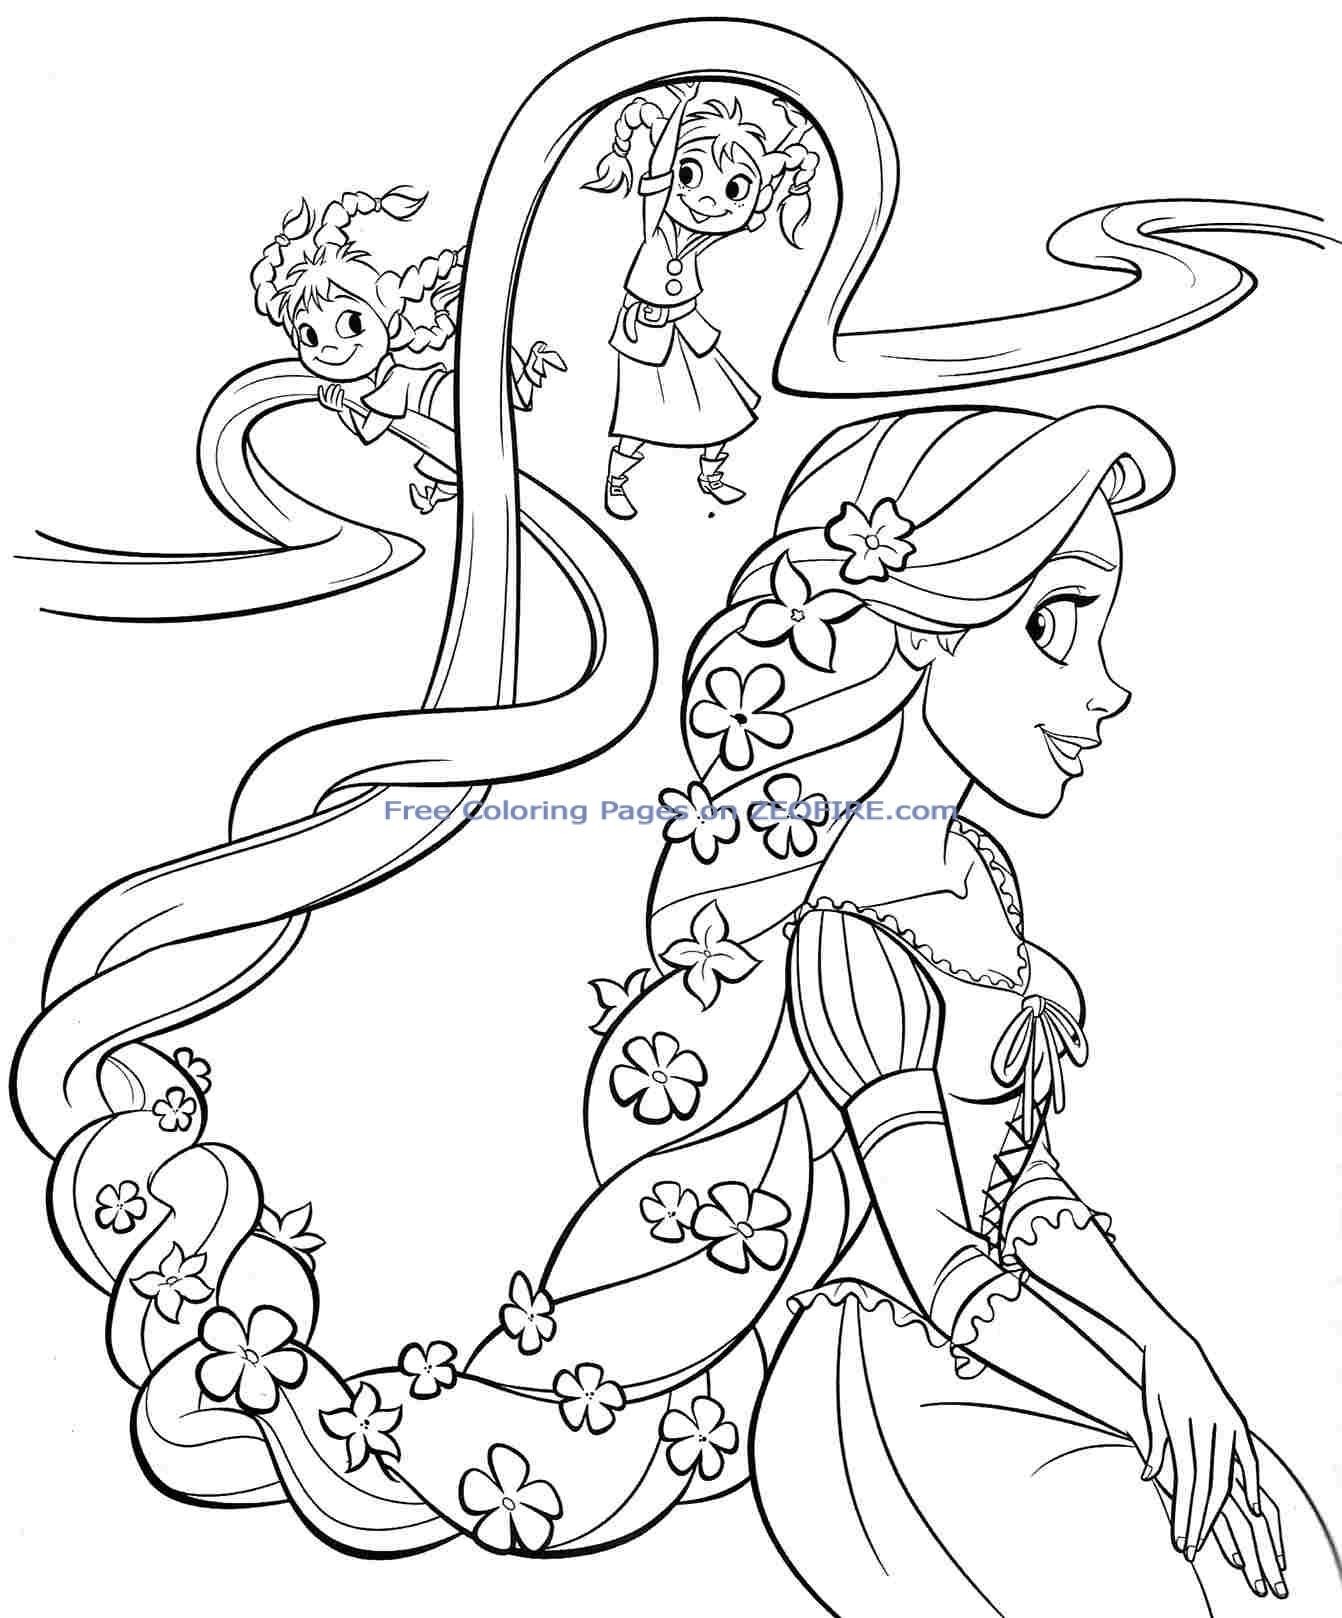 Rapunzel Coloring Pages Awesome Amazing Princess Coloring Pages Printables 88